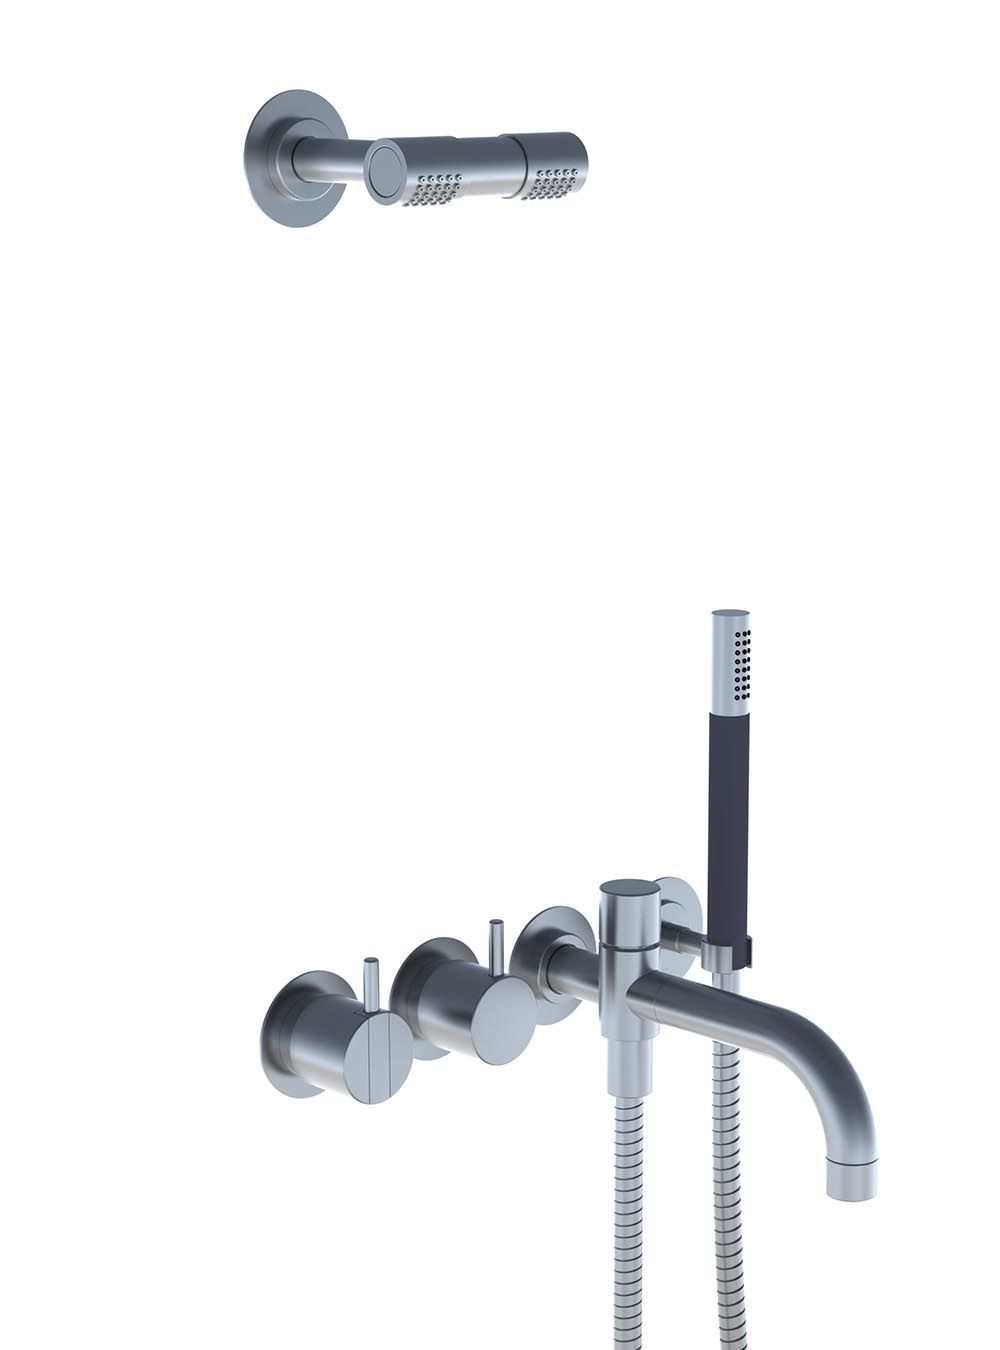 2441DT8-081D: One-handle build-in mixer with ceramic disc technology and diverter. 2441DT8-08D1UP = Build-in mixer